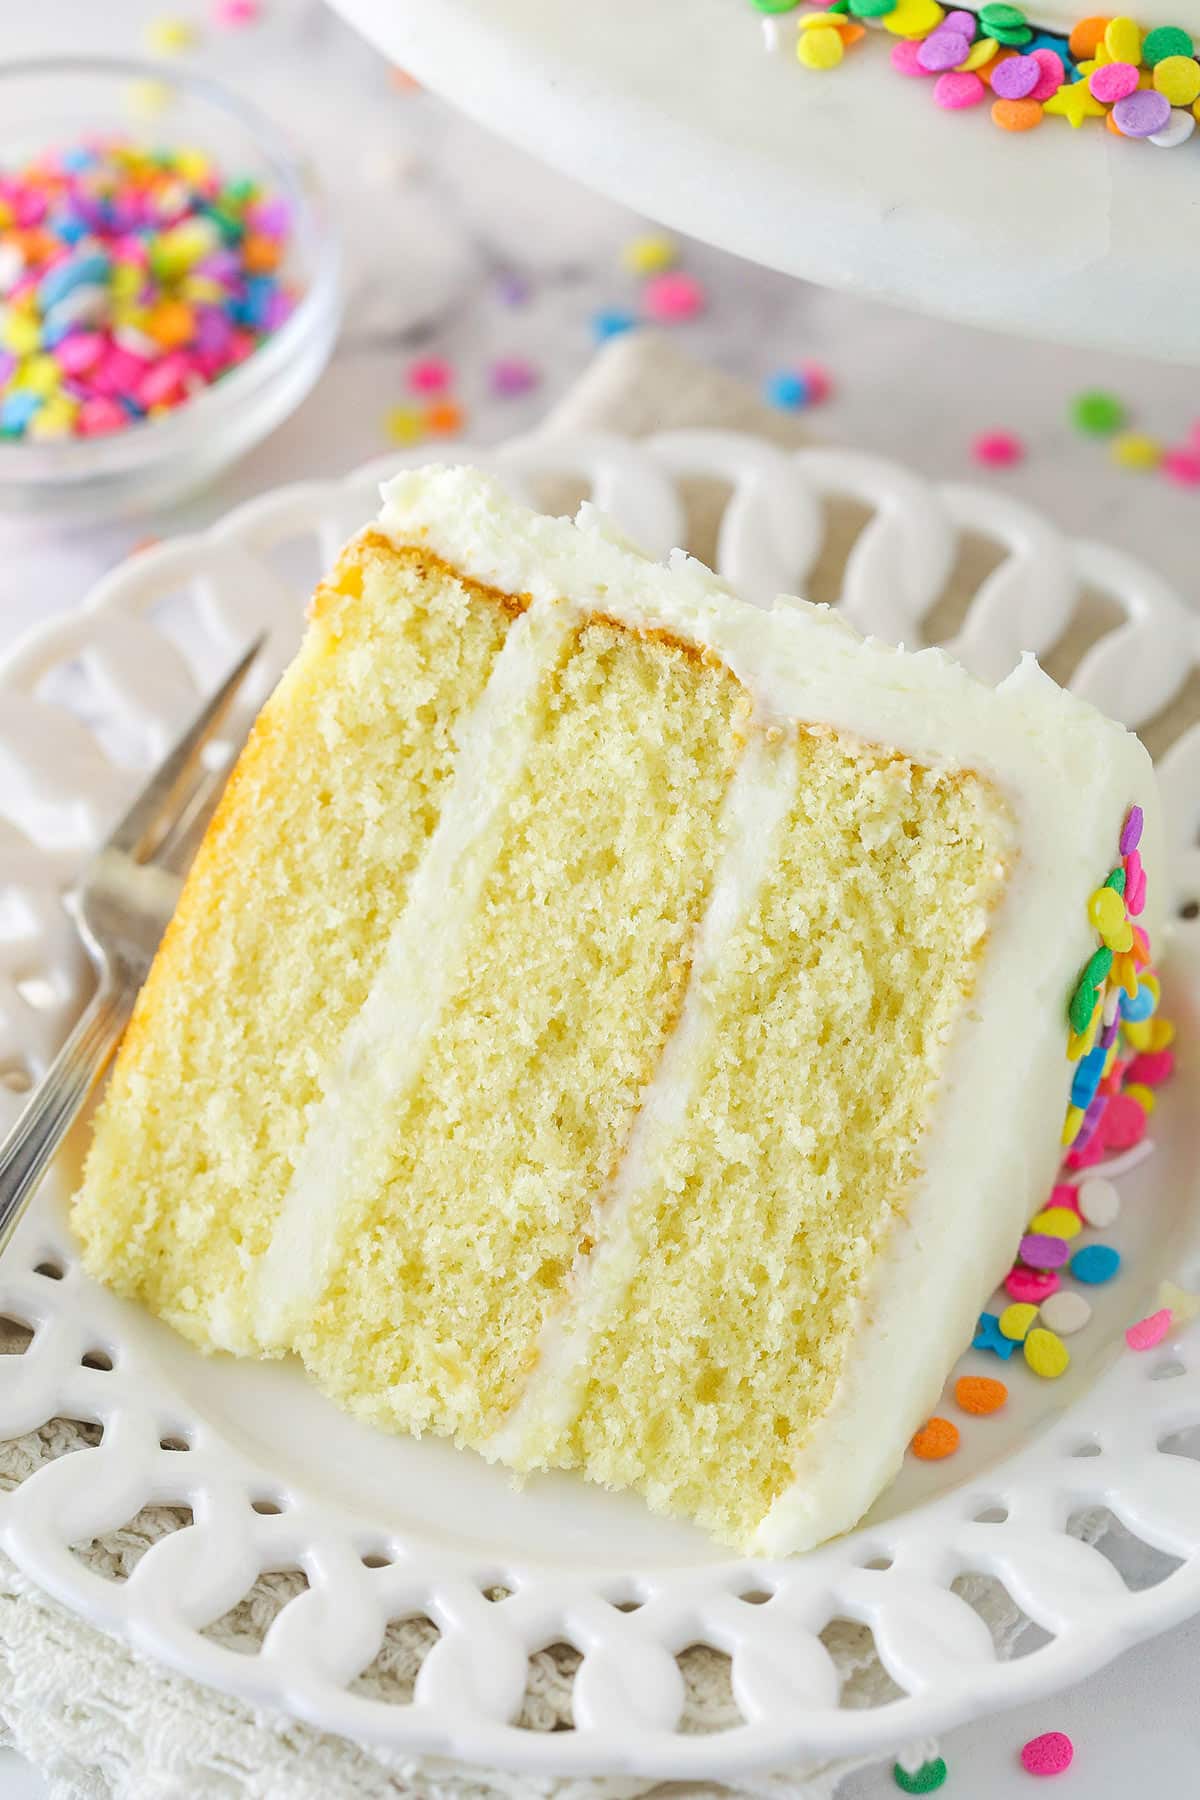 How to Bake a Layer Cake Using a Sheet Pan | Epicurious